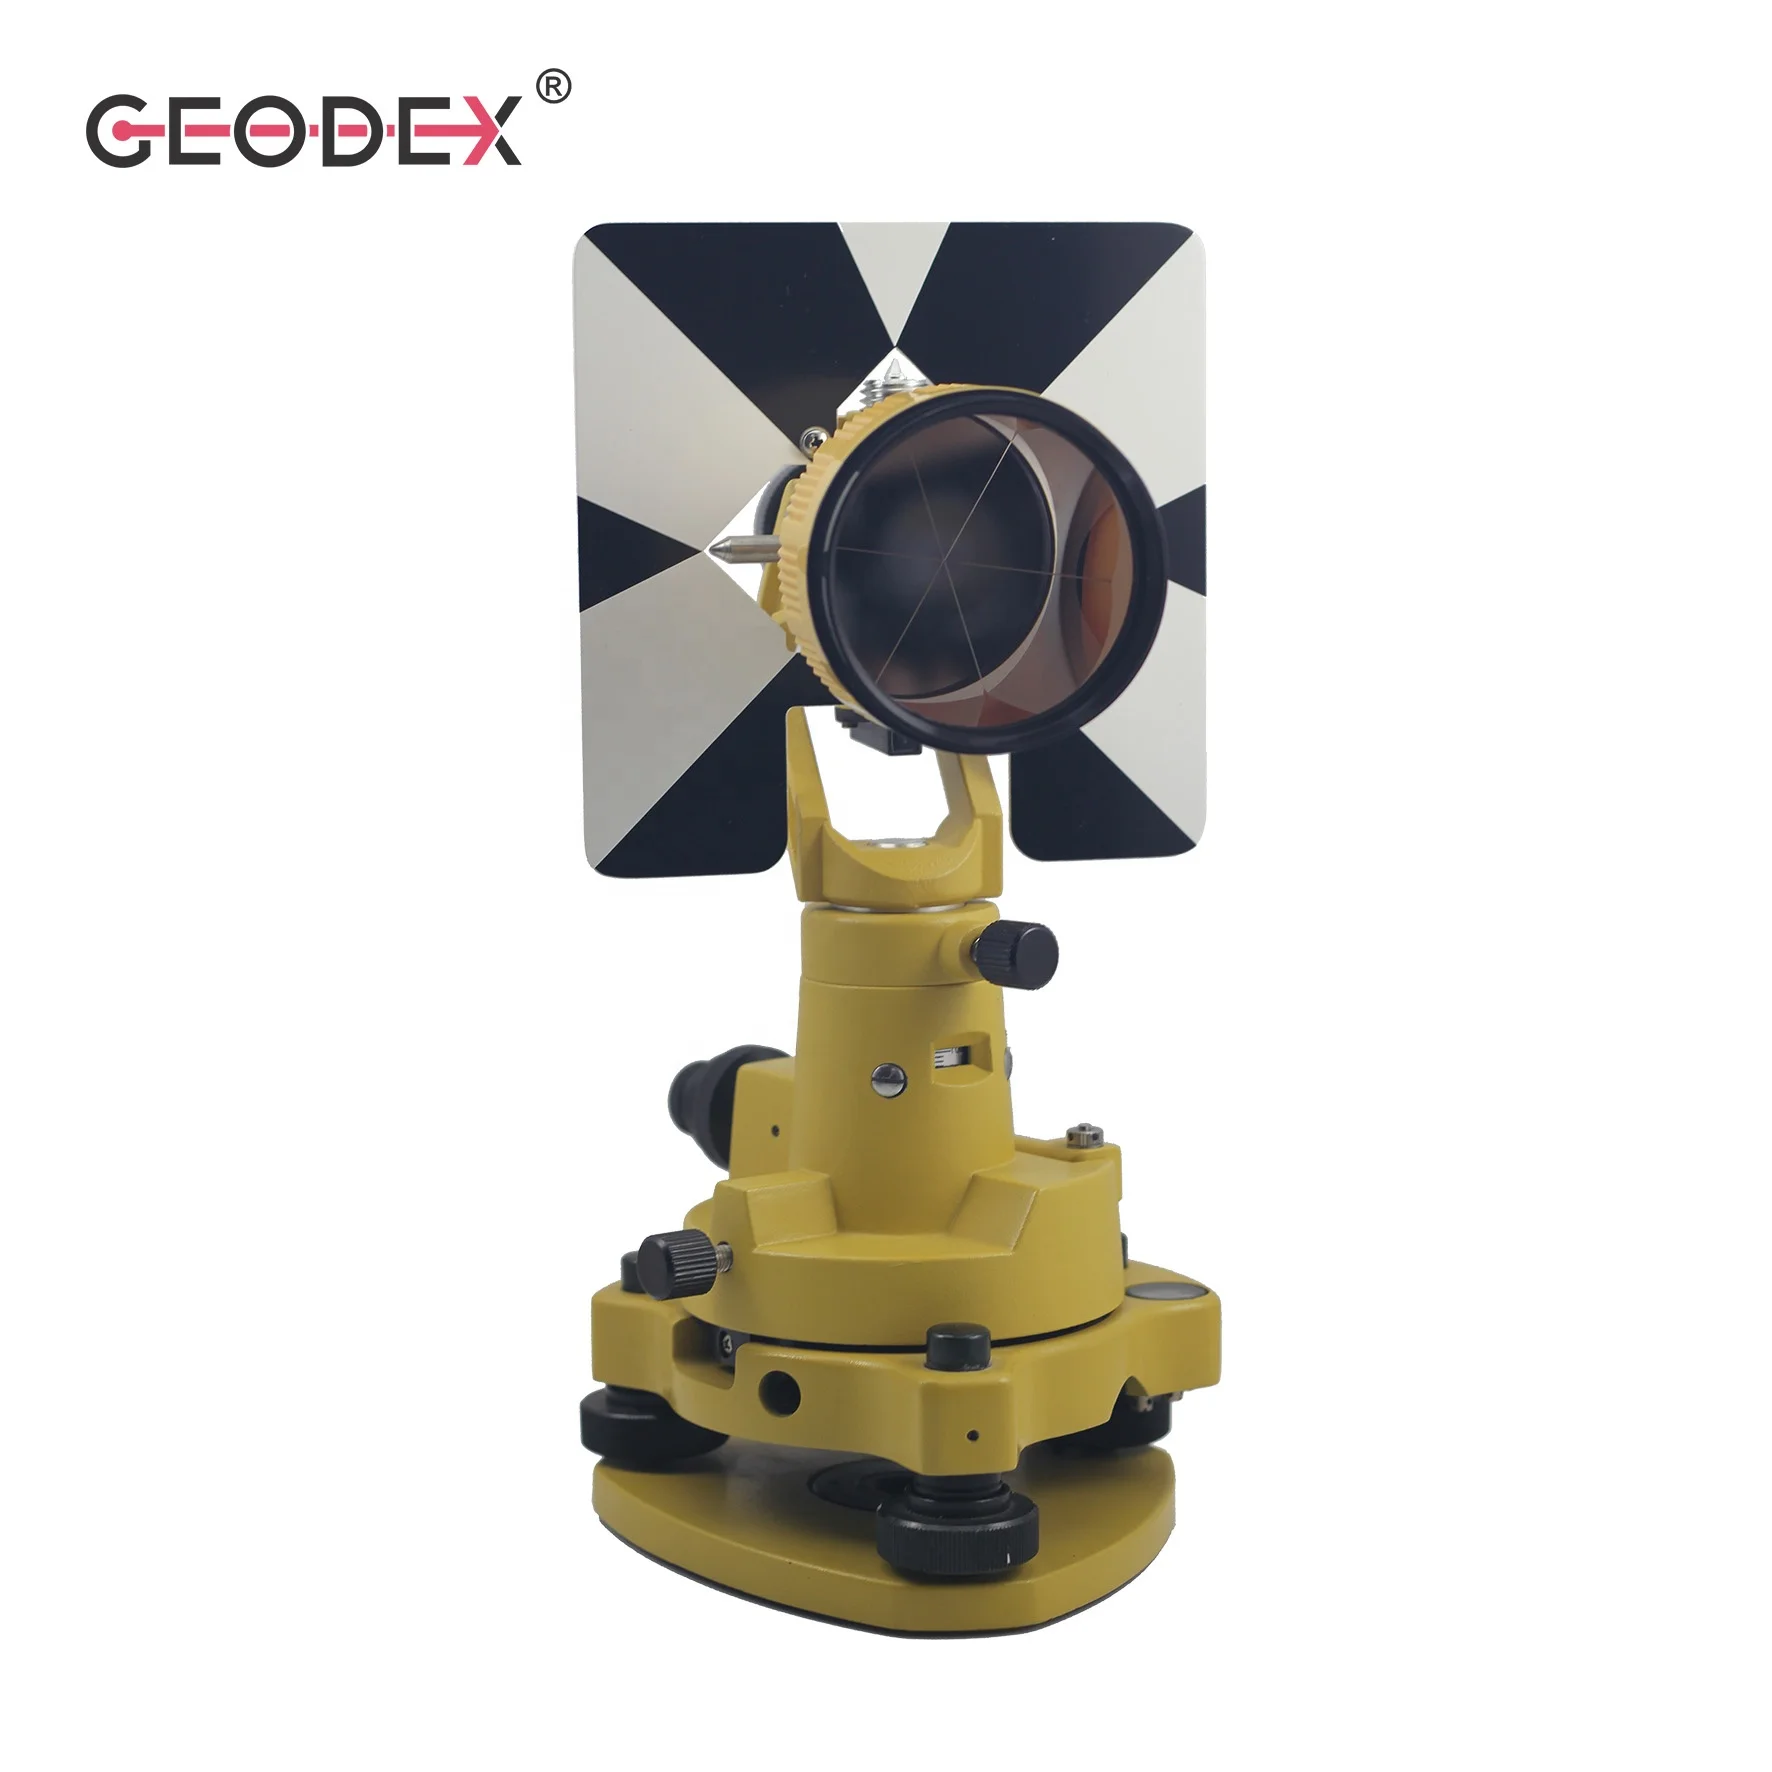 Prism Reflection System: Tds11 Used For Top Con Series Total Stations - Buy  Surveying Prism,Reflector Prism,Total Station Price Product on 